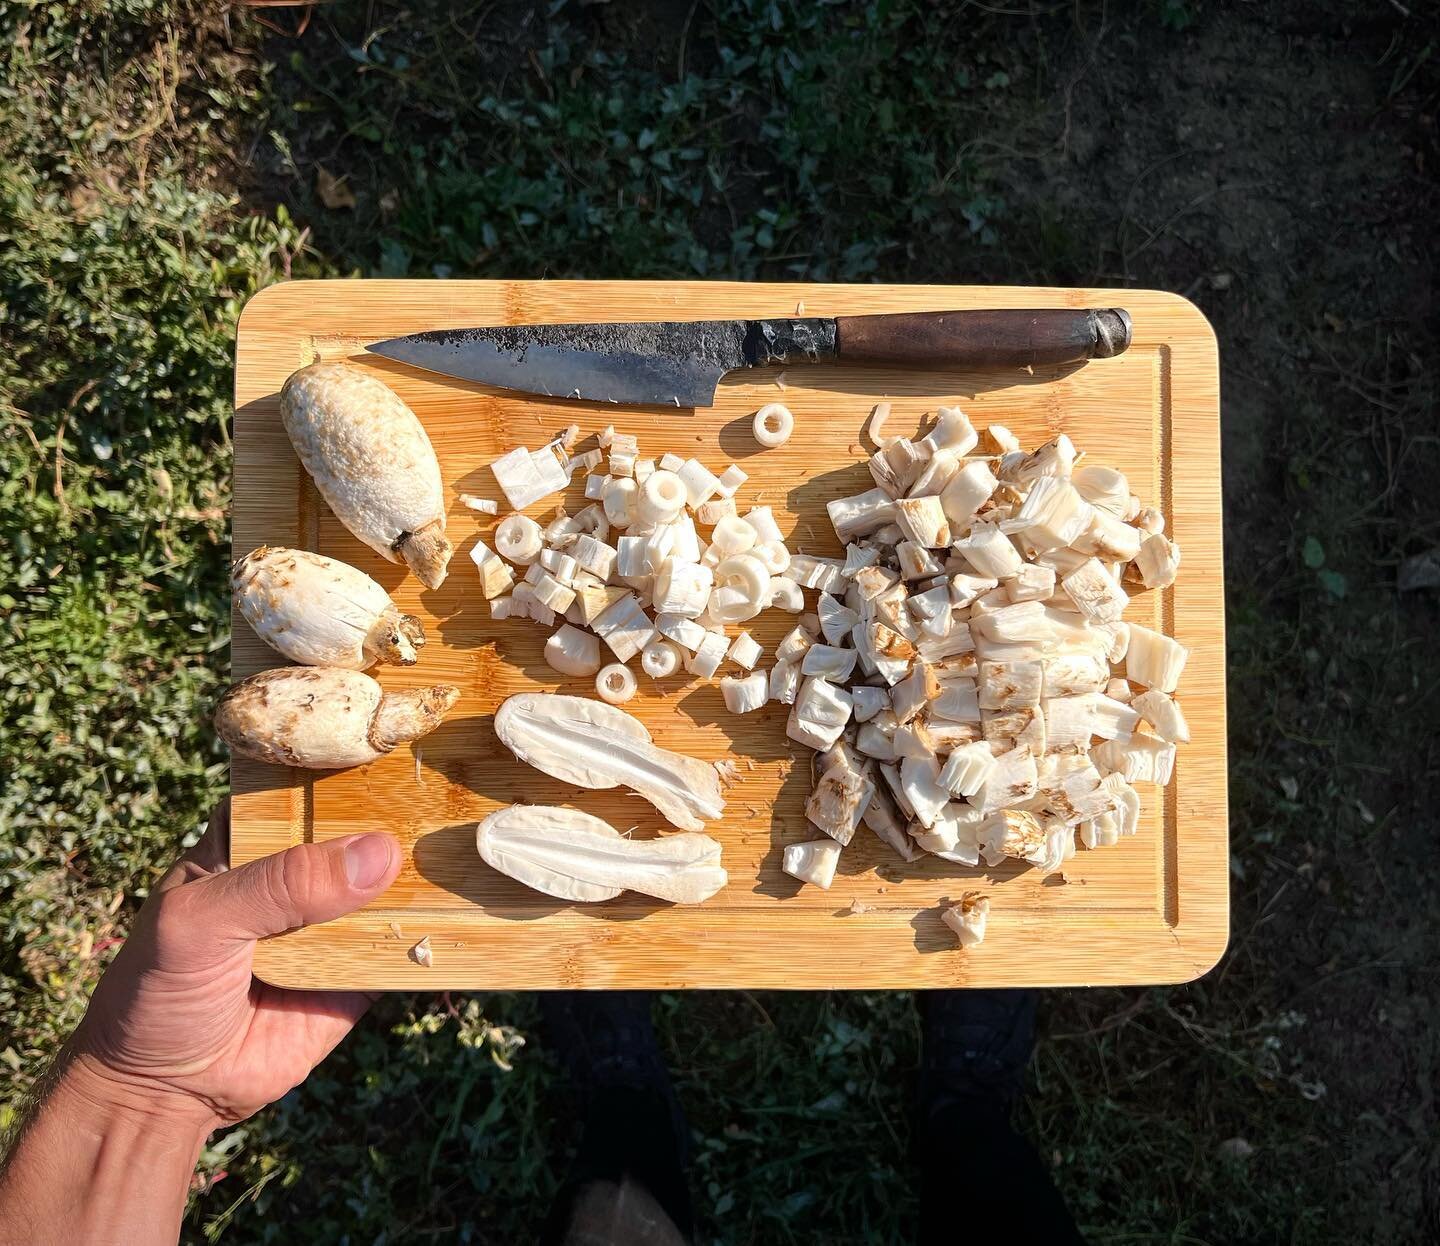 Found a small bounty of Shaggy Mane mushrooms in Golden, CO. 🍄 ✨

#mushrooms #foraging #wildfood #wildfoodwildplaces #mushroomforaging #foragecolorado #eatwild #bewild #goldencolorado #shaggymane #coprinuscomatus